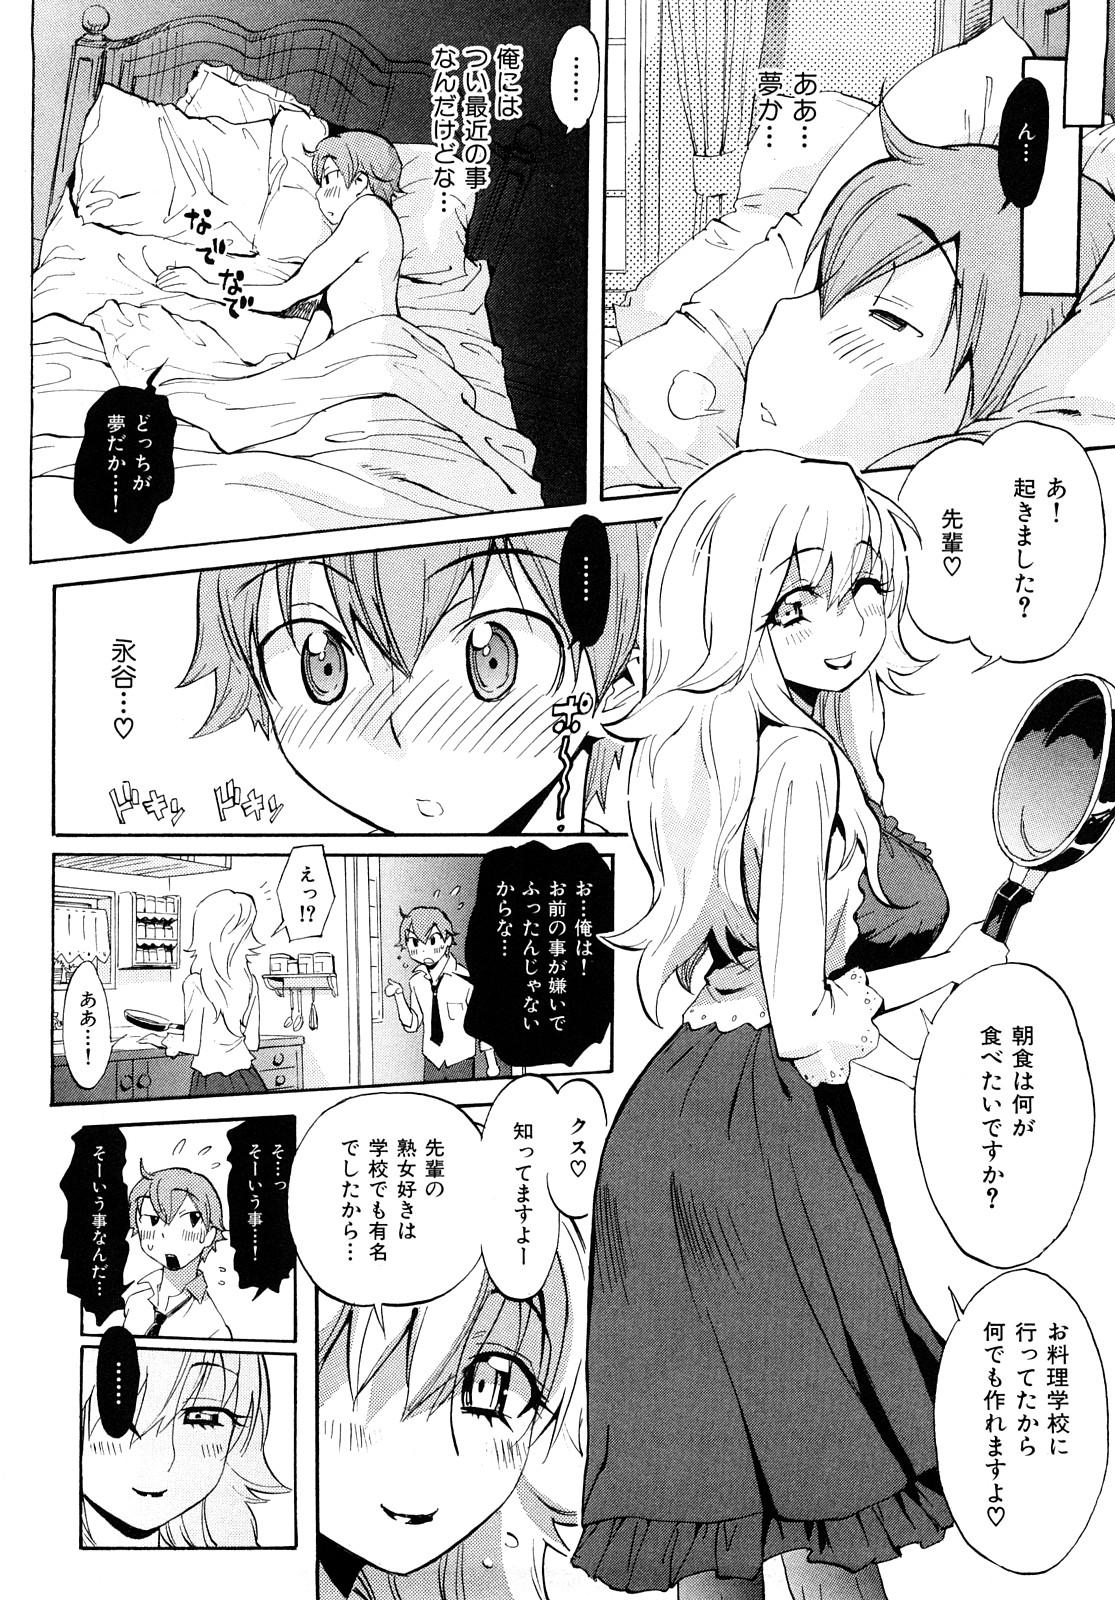 Spooning Otome no Itazura Best Blowjobs - Page 12